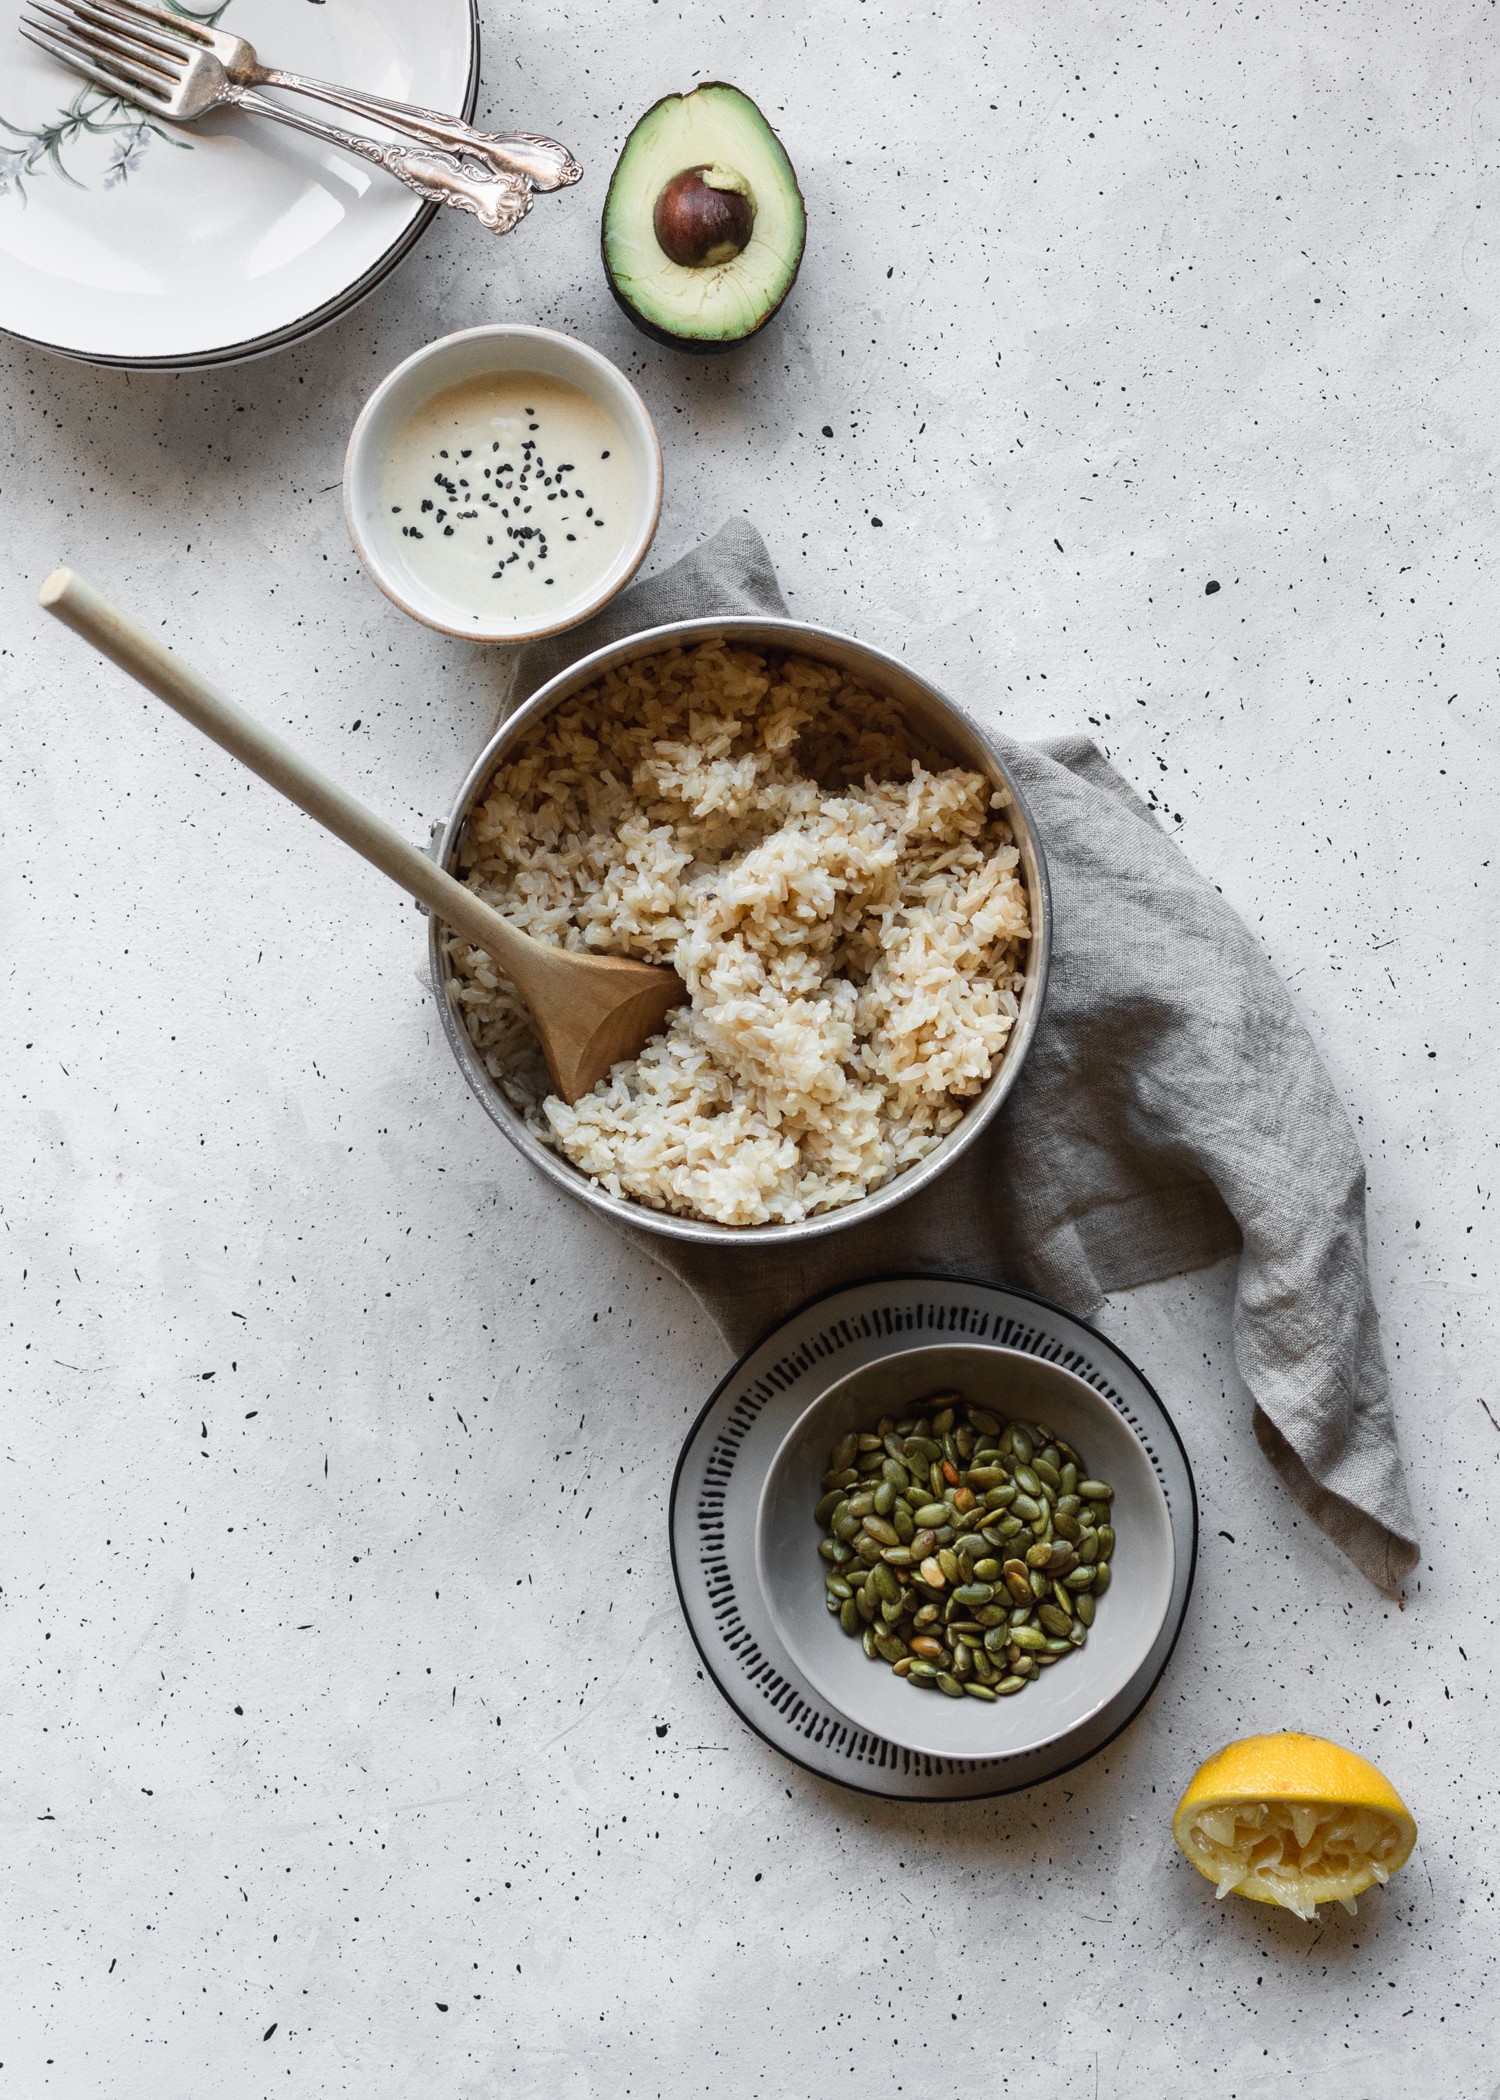 An overhead shot of a pot of rice placed on a linen, bowl of pepitas, bowl of tahini dressing, avocado, bowls, and half a lemon in a curved shape on a grey speckled counter.